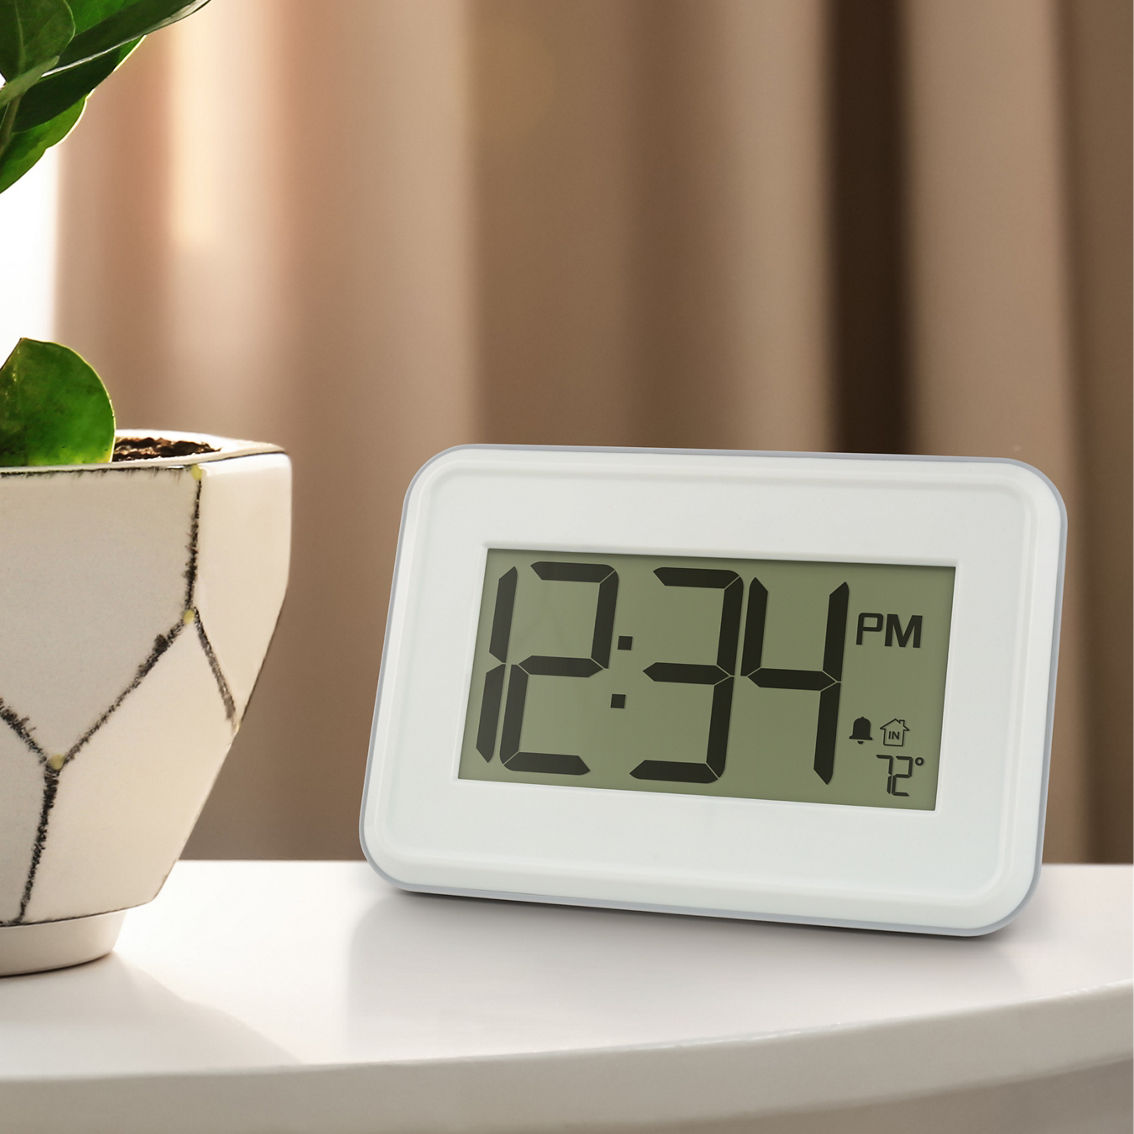 La Crosse  Digital Wall Clock with Indoor Temperature and Timer - Image 2 of 2